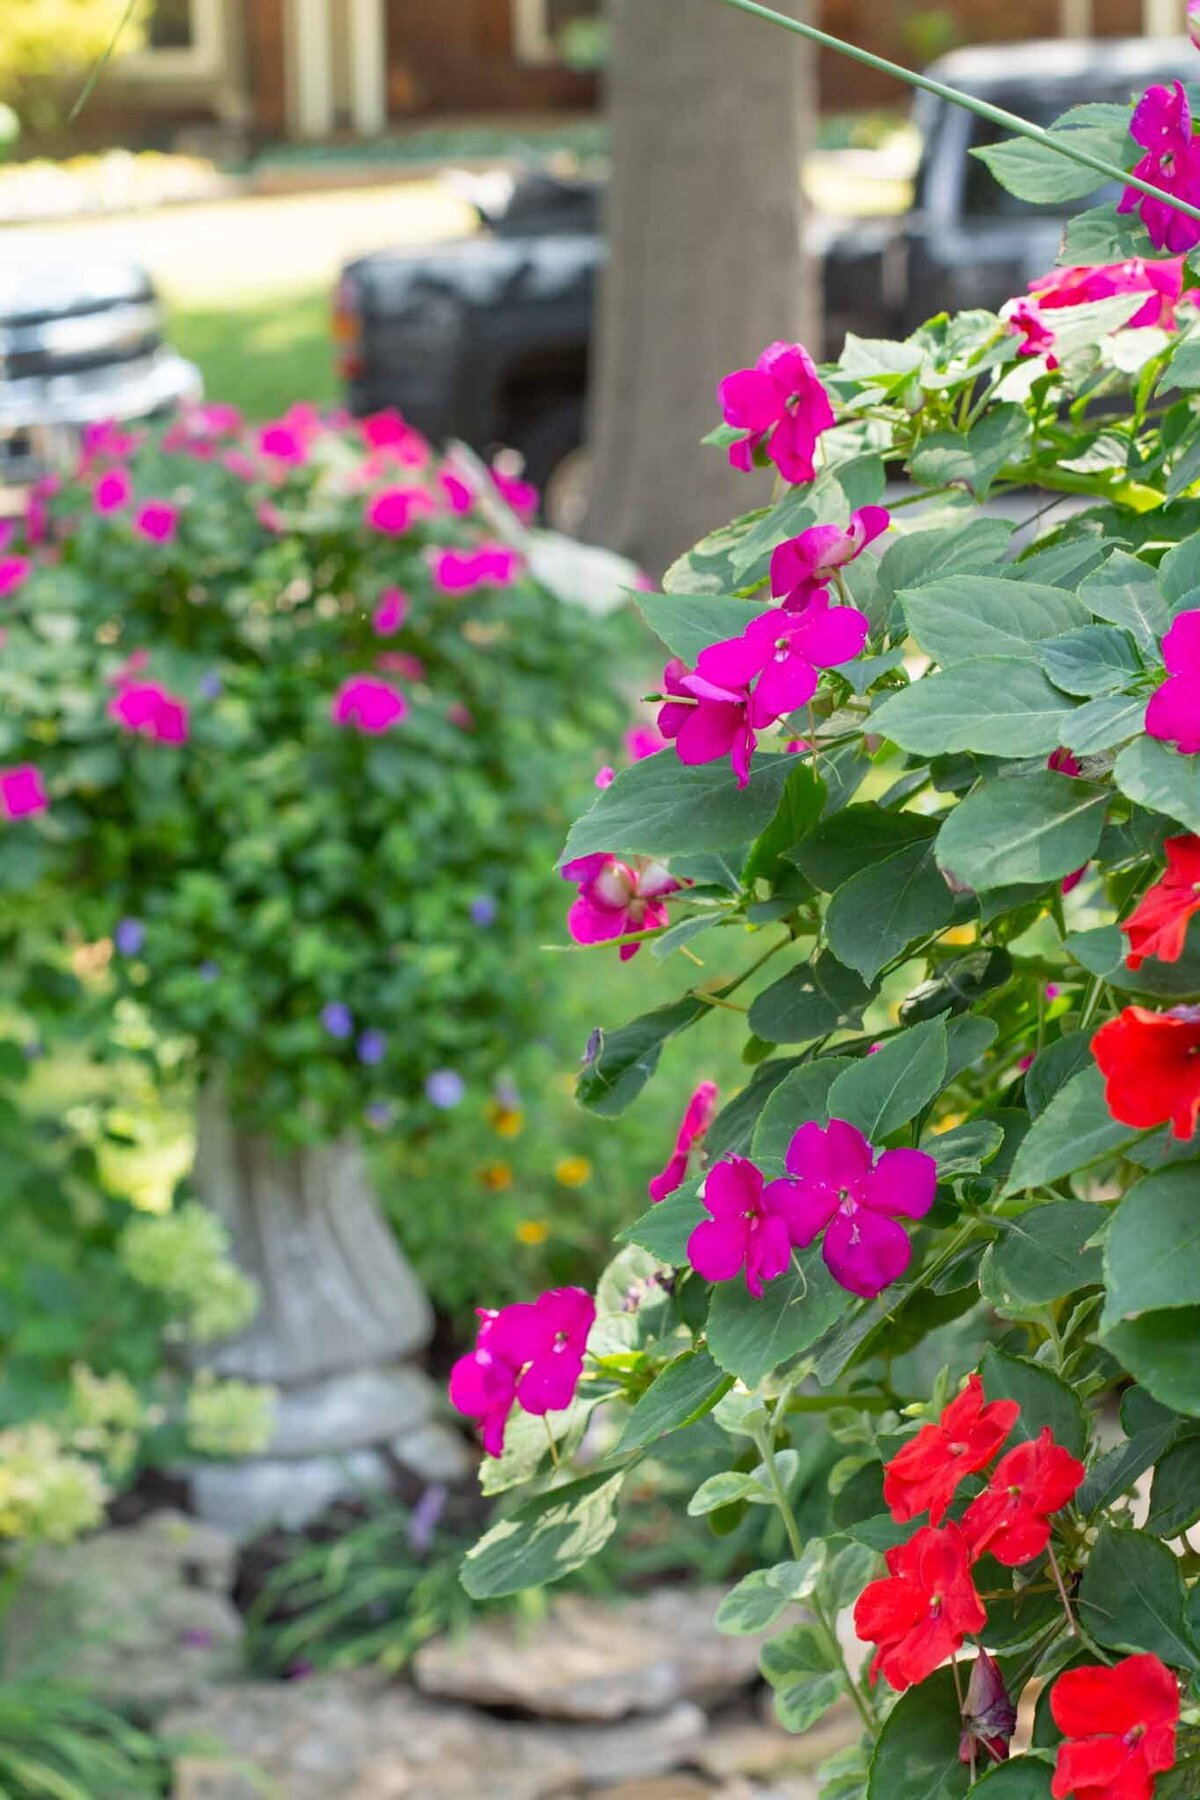 Red and purple flowers in a flower pot